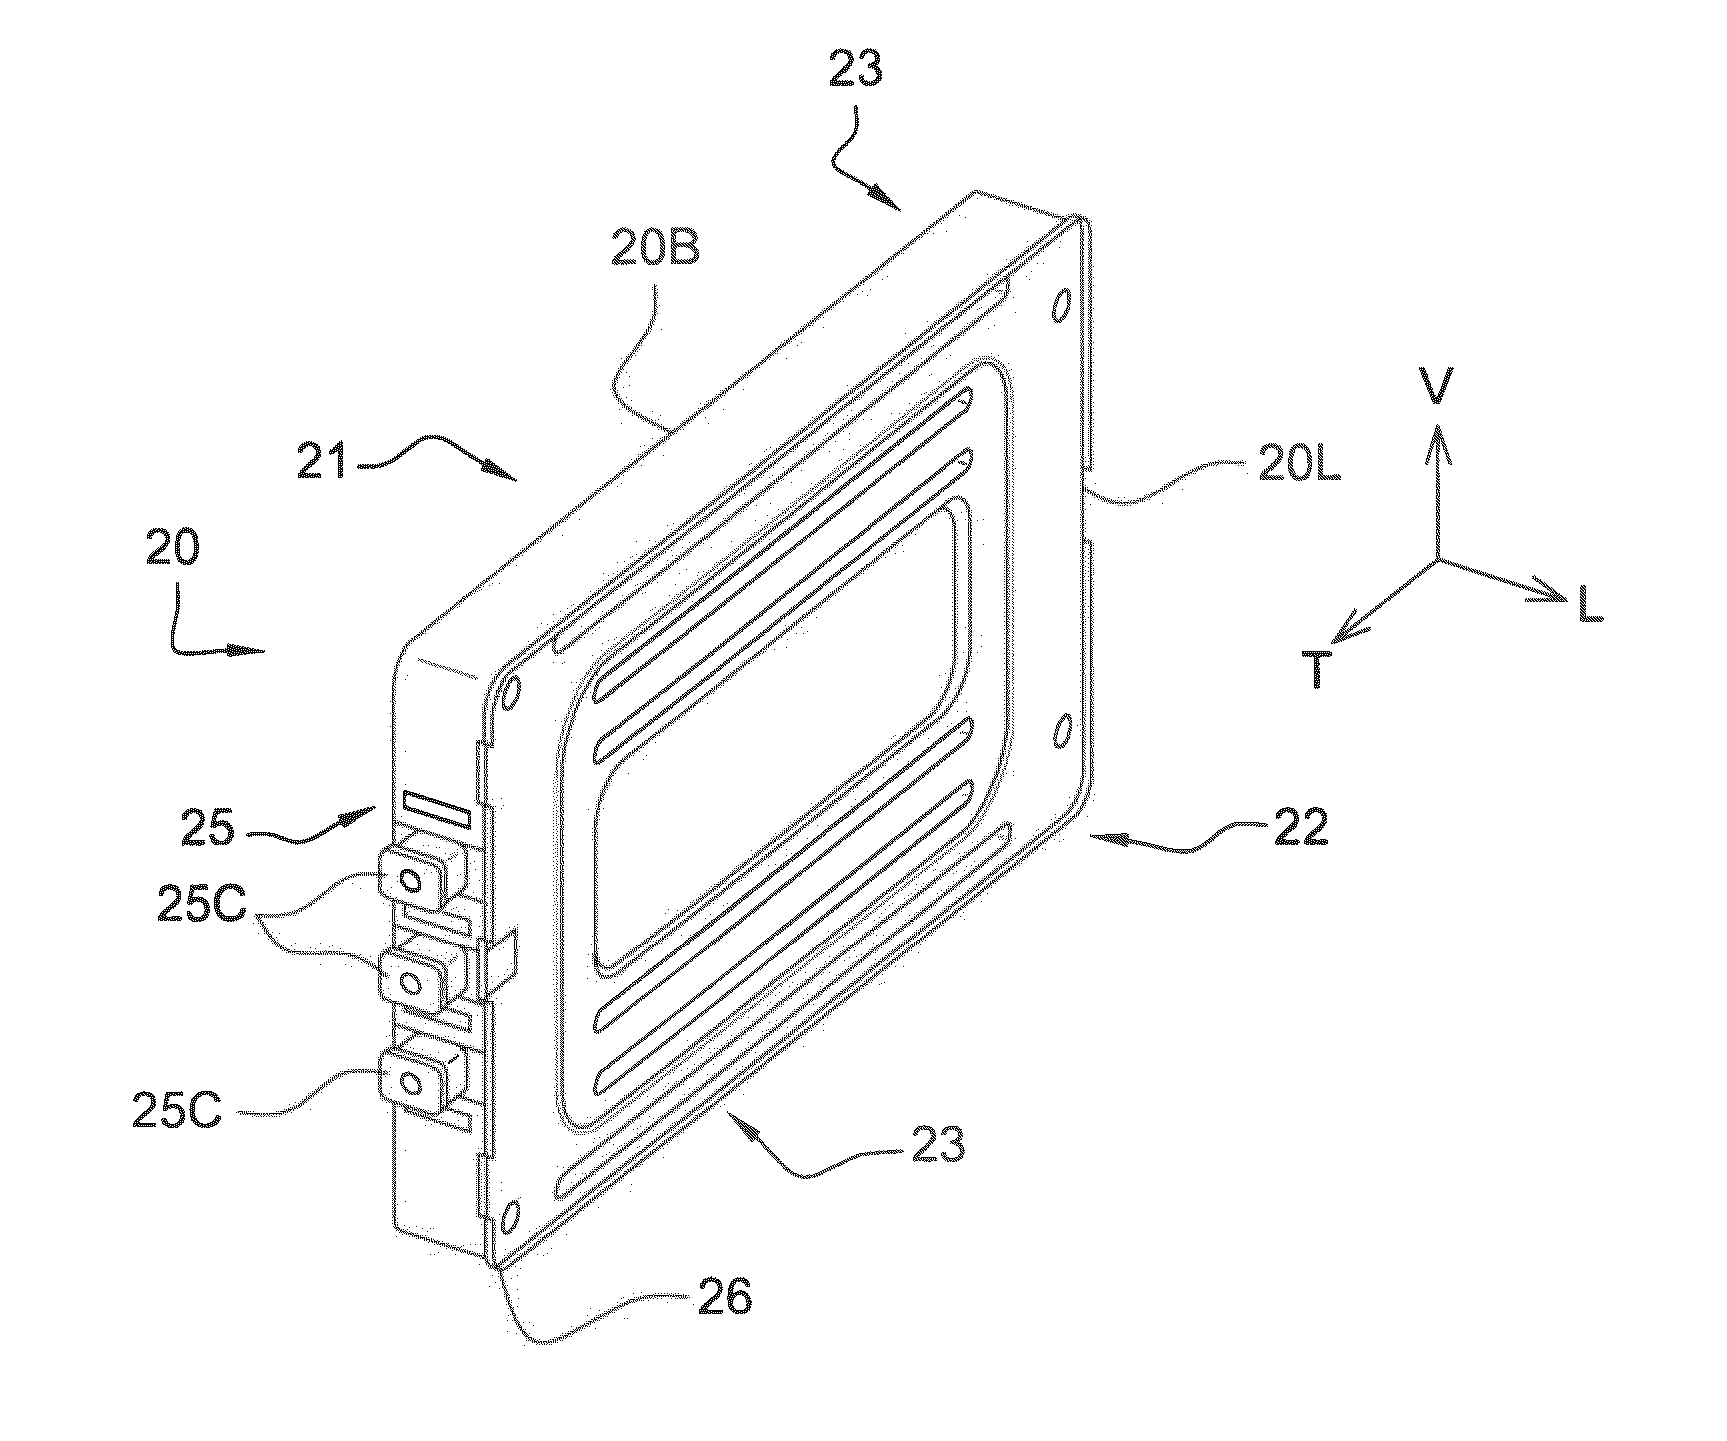 Battery pack for an electric powertrain vehicle